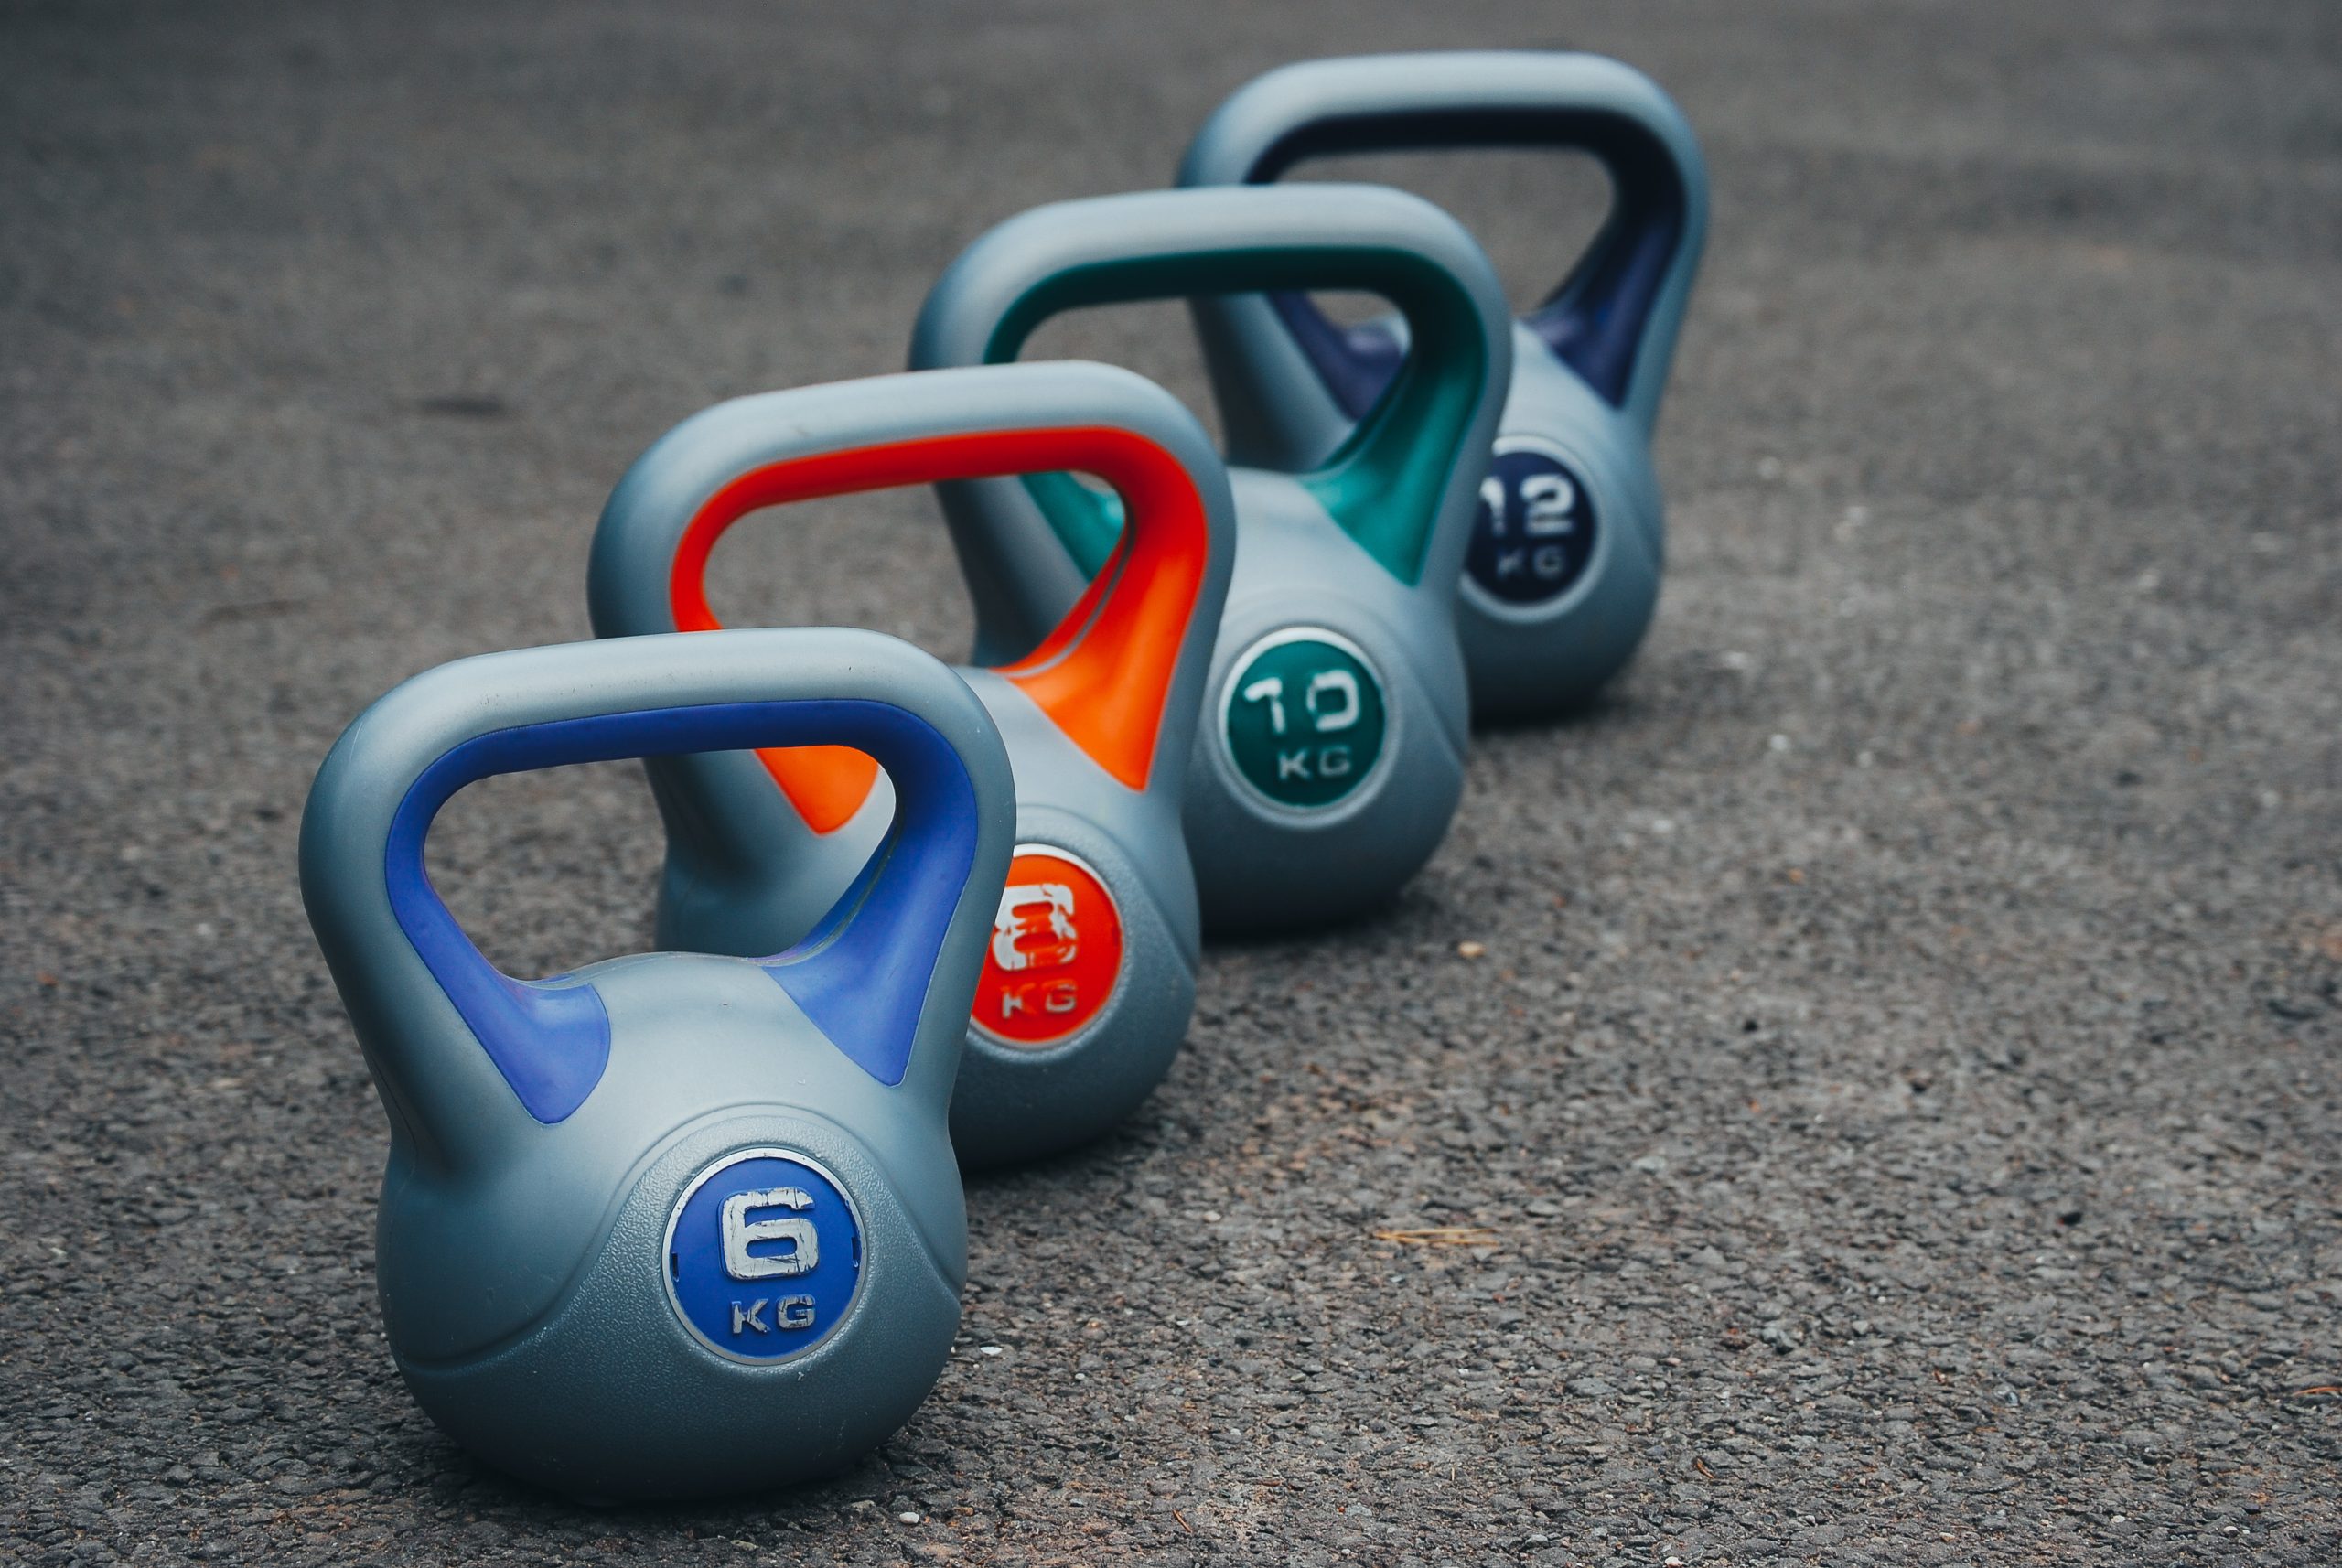 Kettlebell weights – how to choose the optimal load?